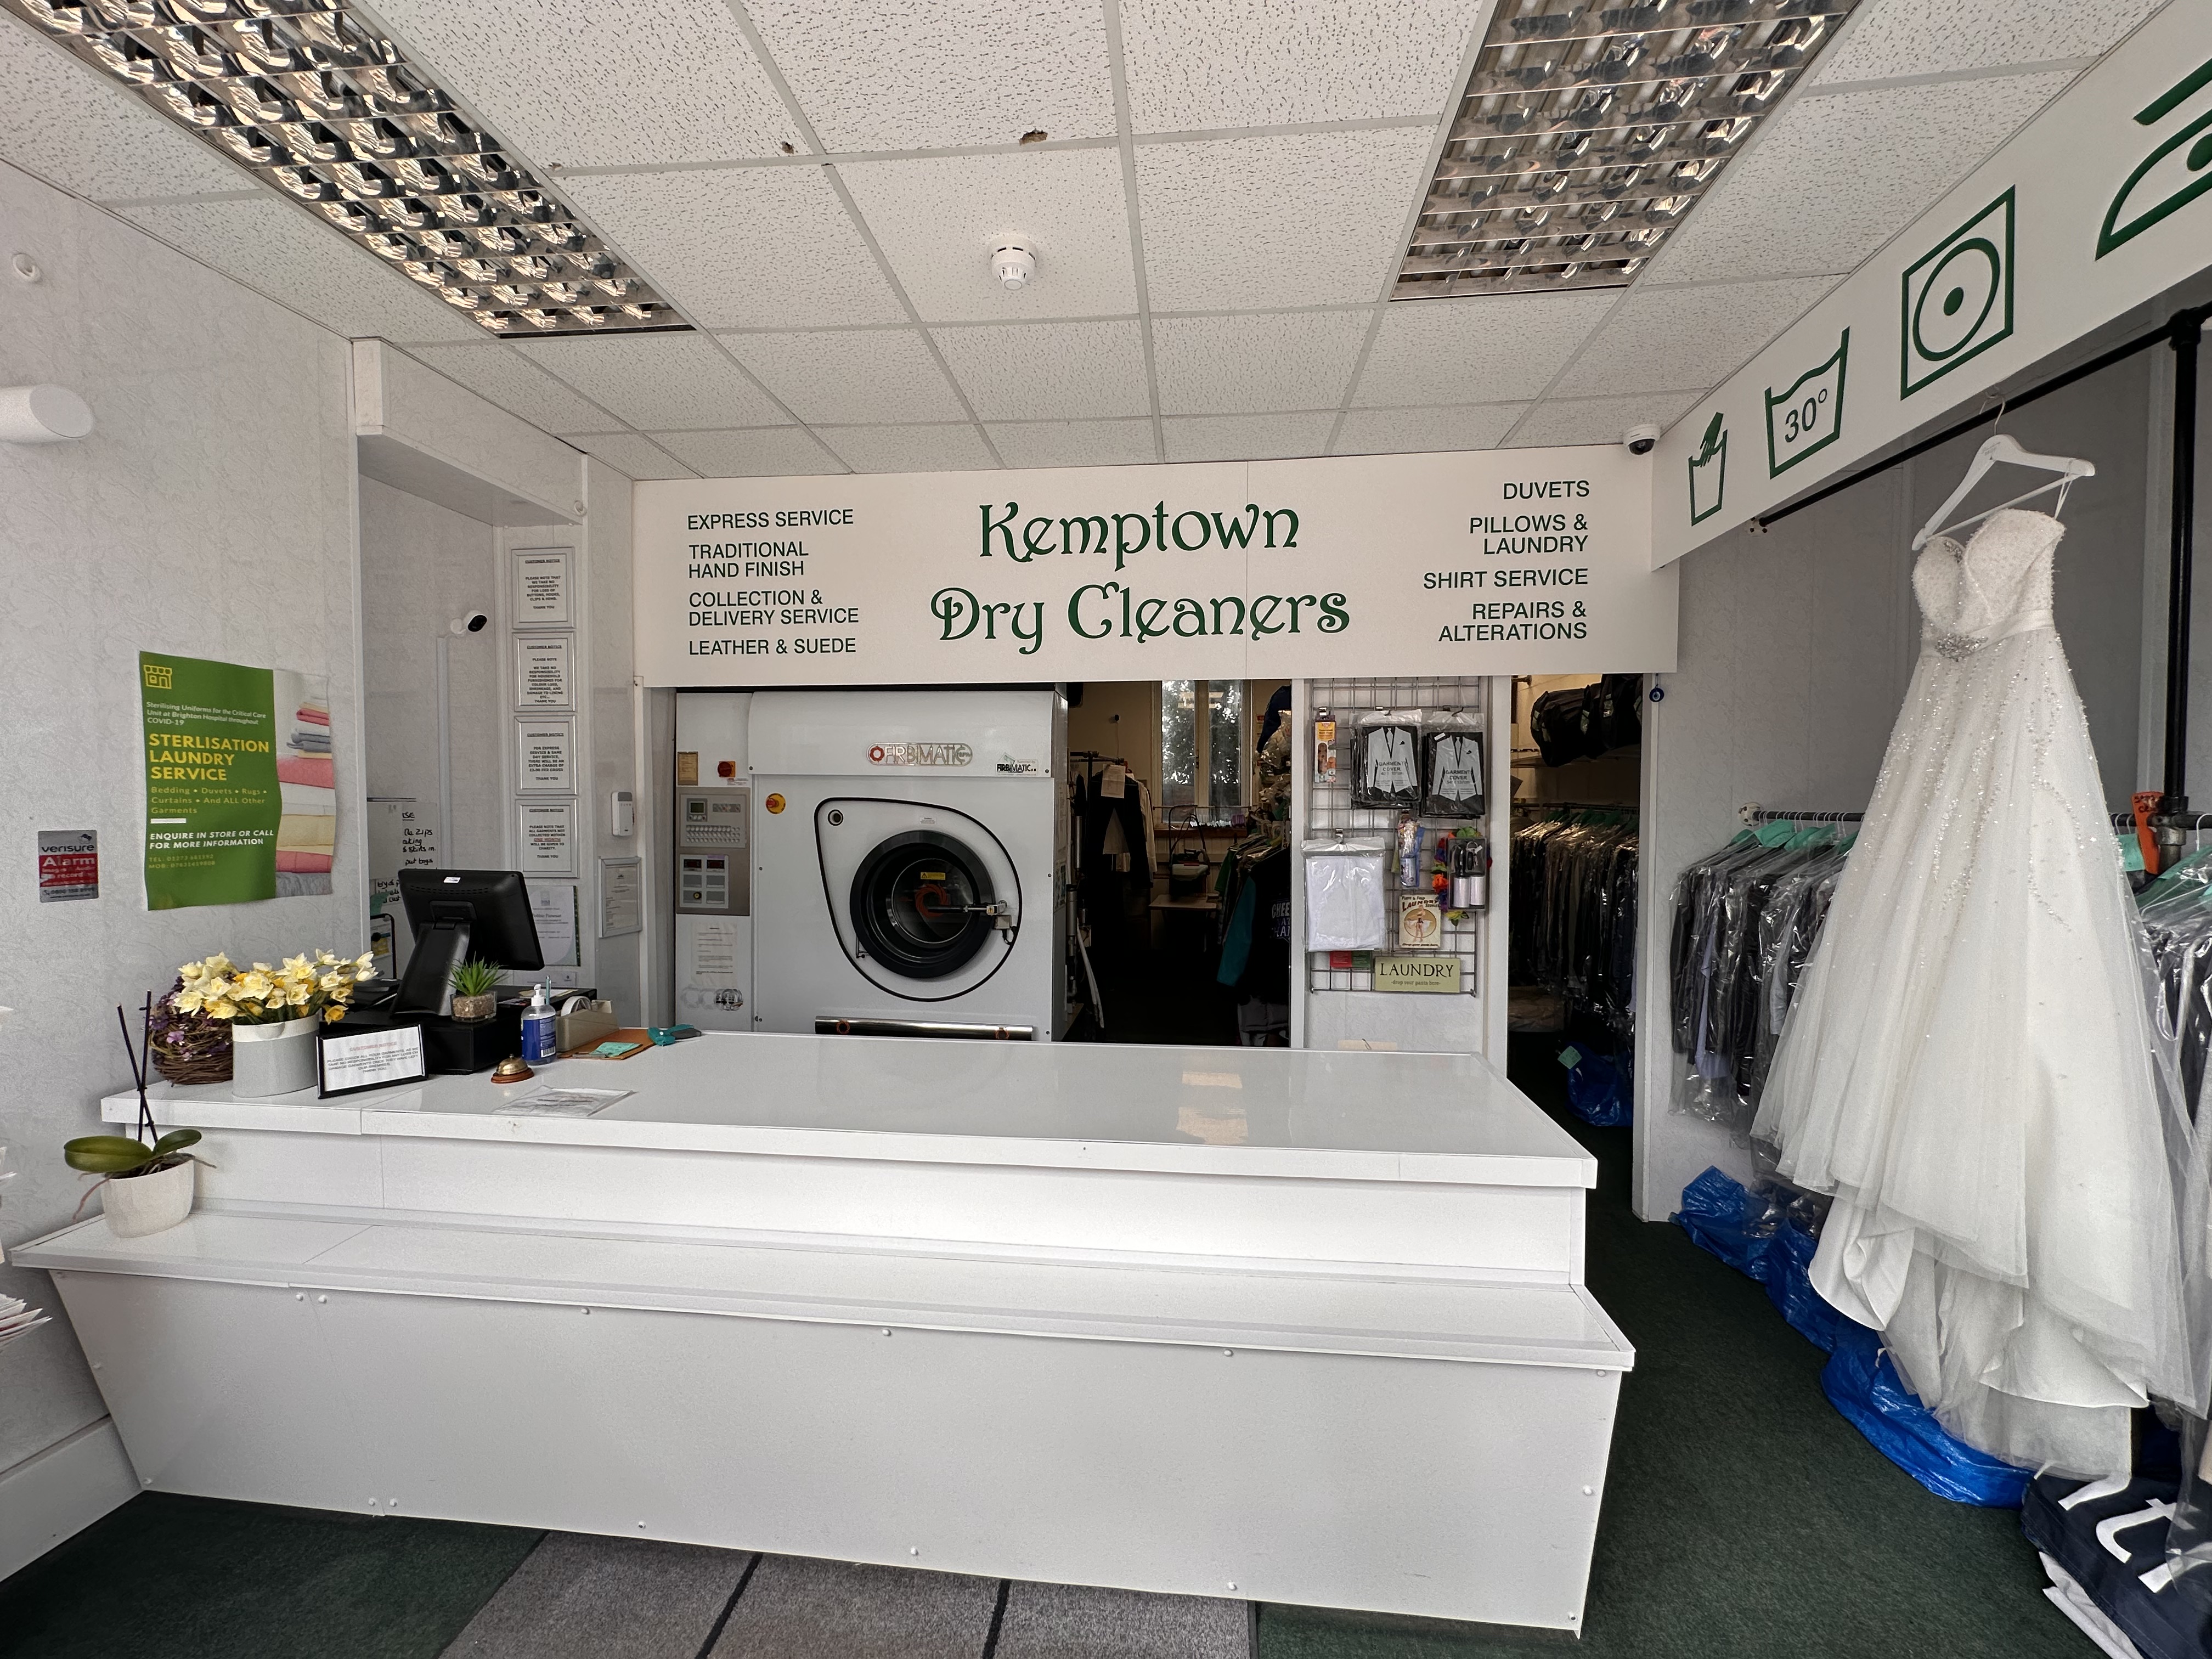 DRY CLEANERS AND LAUNDRY BUSINESS LOCATED IN KEMP TOWN VILLAGE